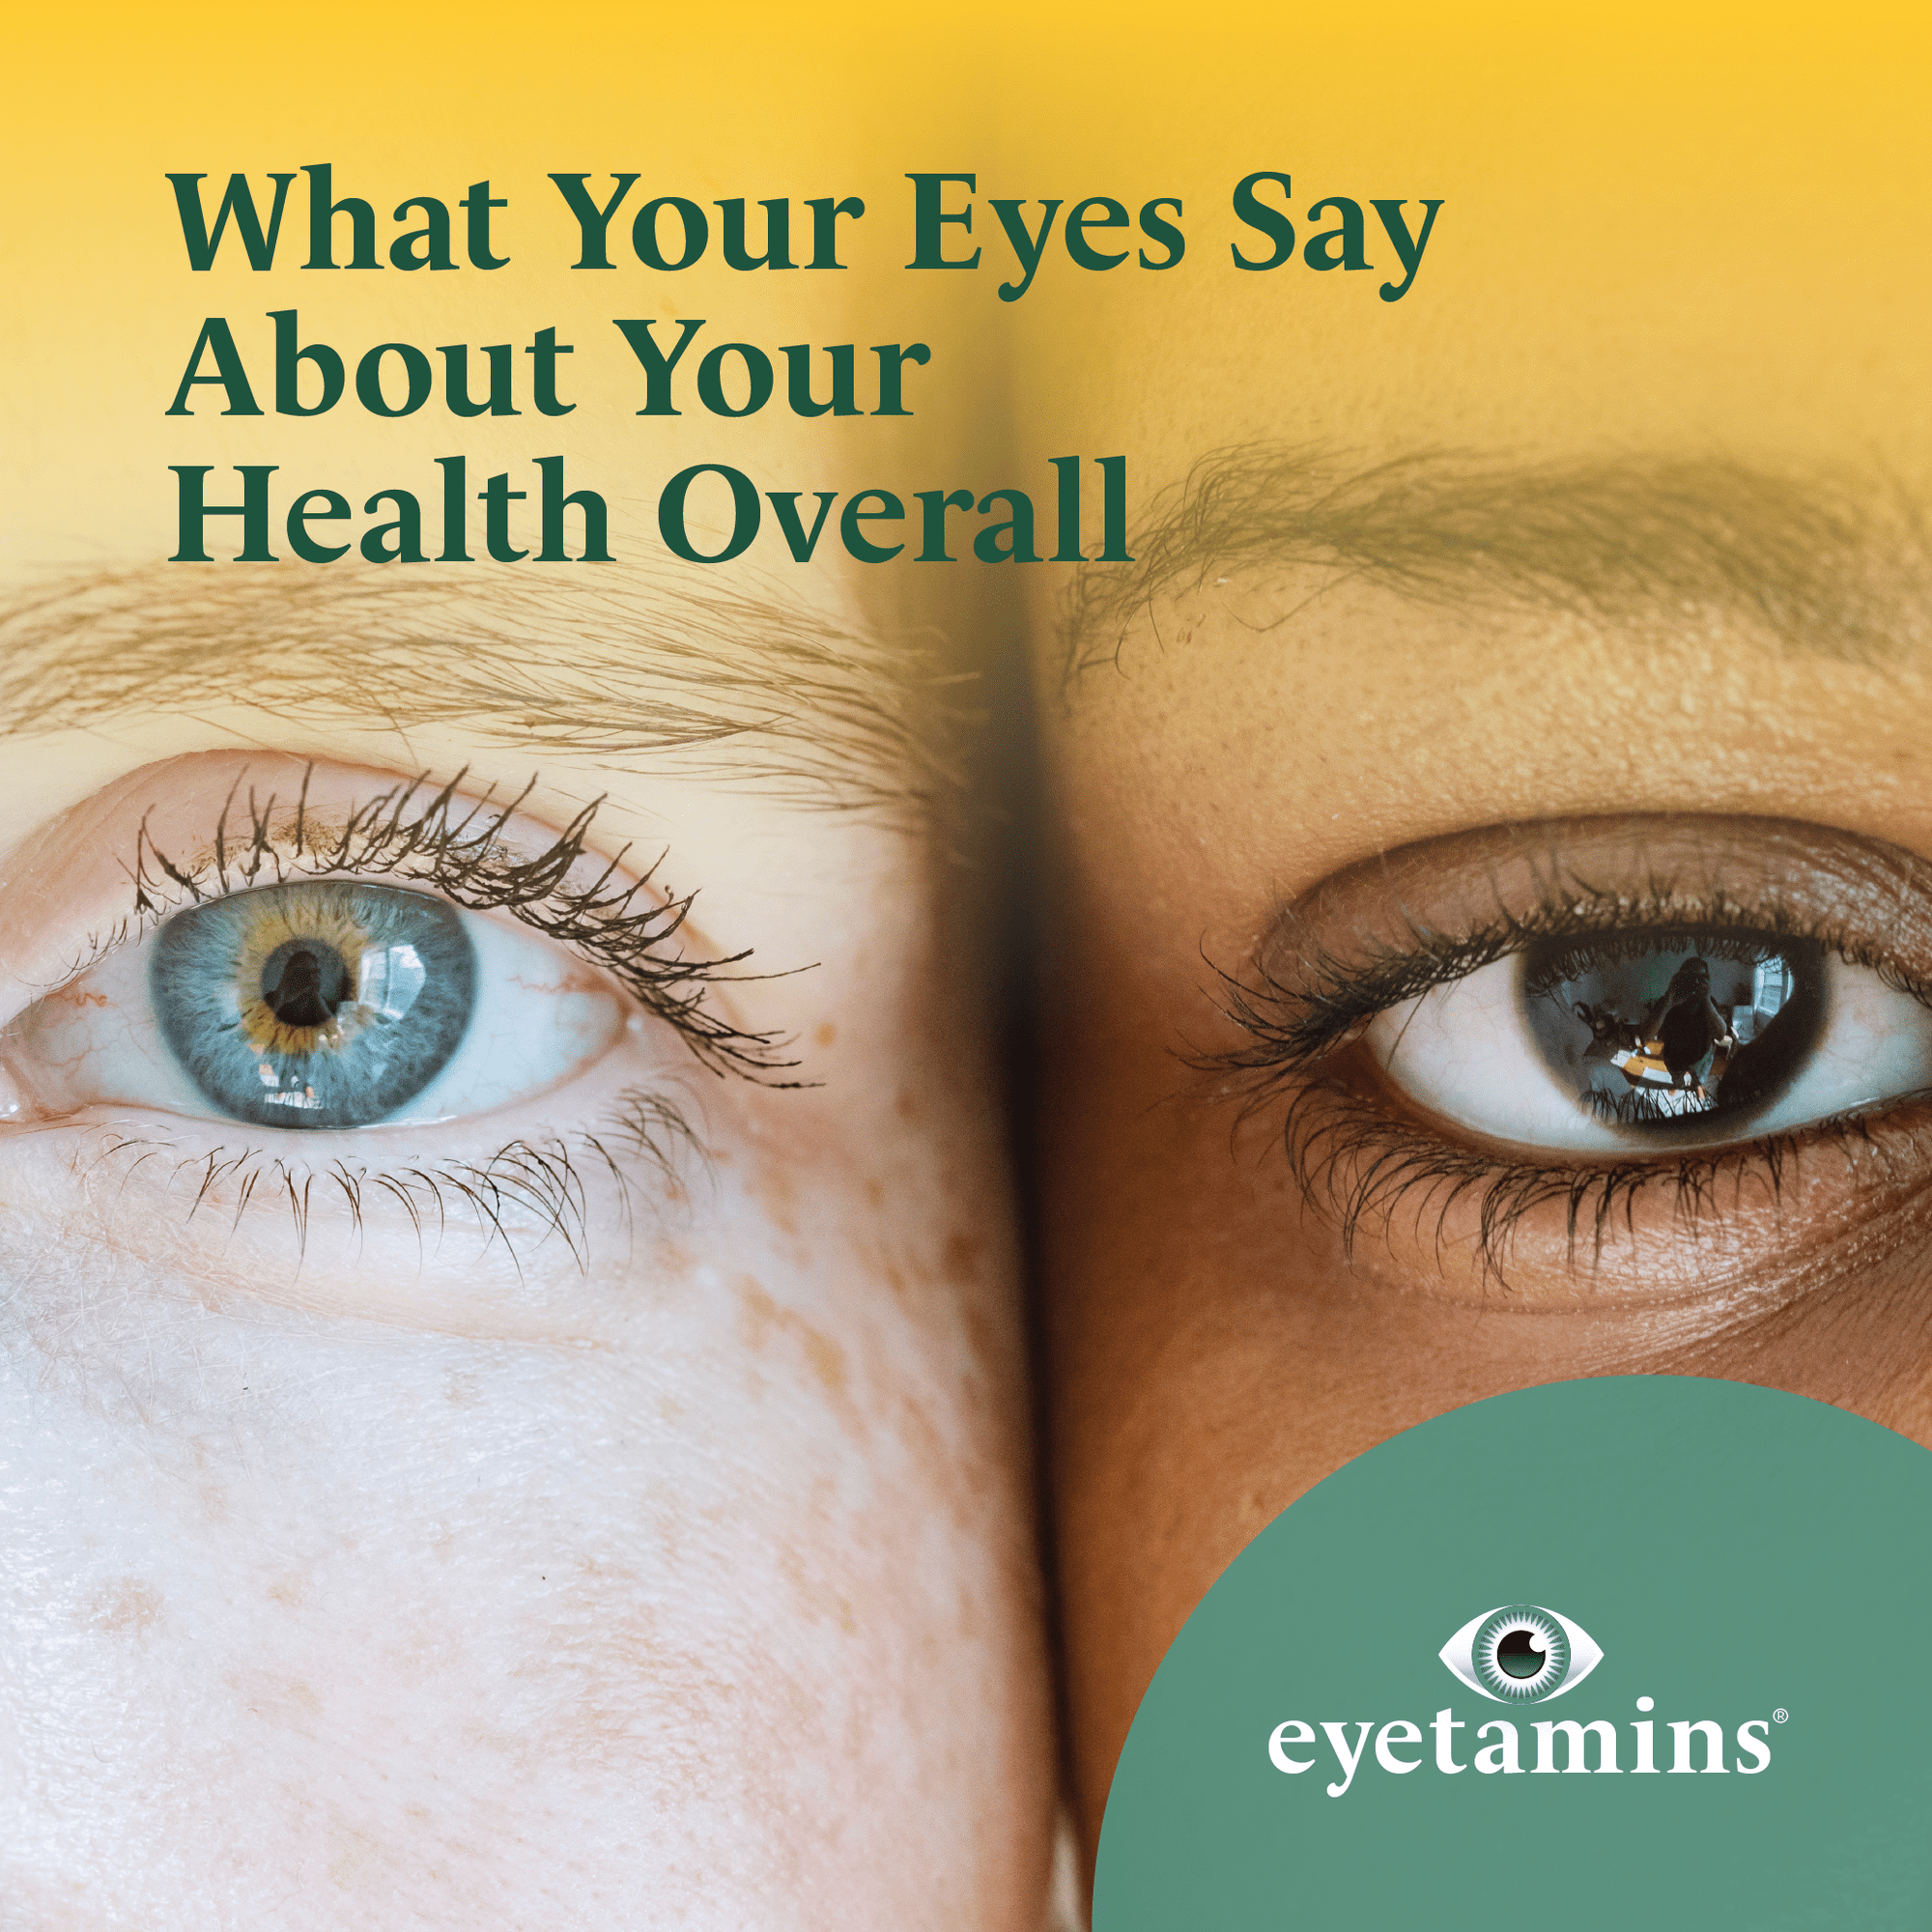 Eyetamins - What Your Eyes Say About Your Health Overall